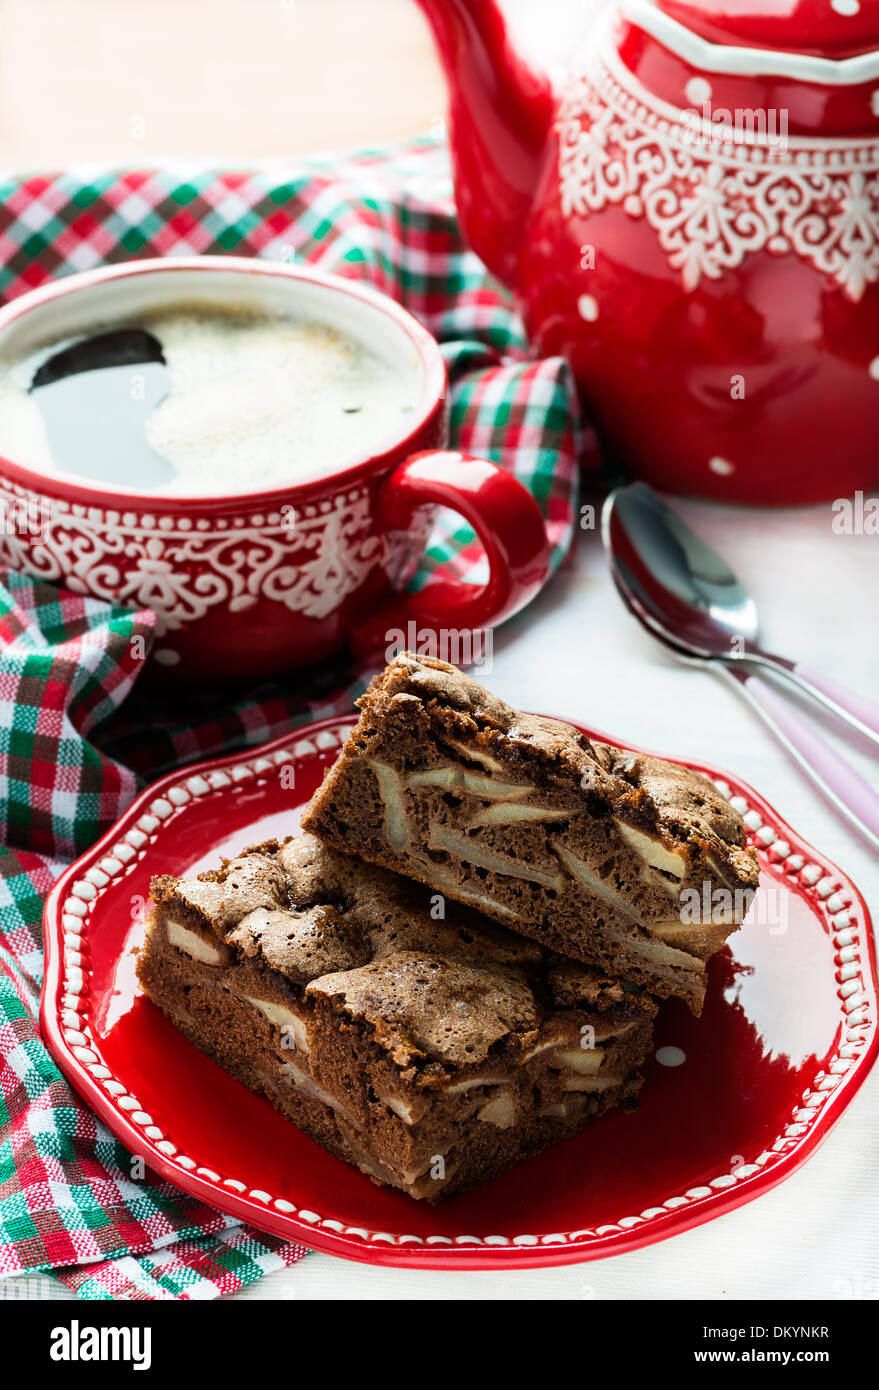 Chocolate pie and cup of coffee with festive decorations, selective focus Stock Photo